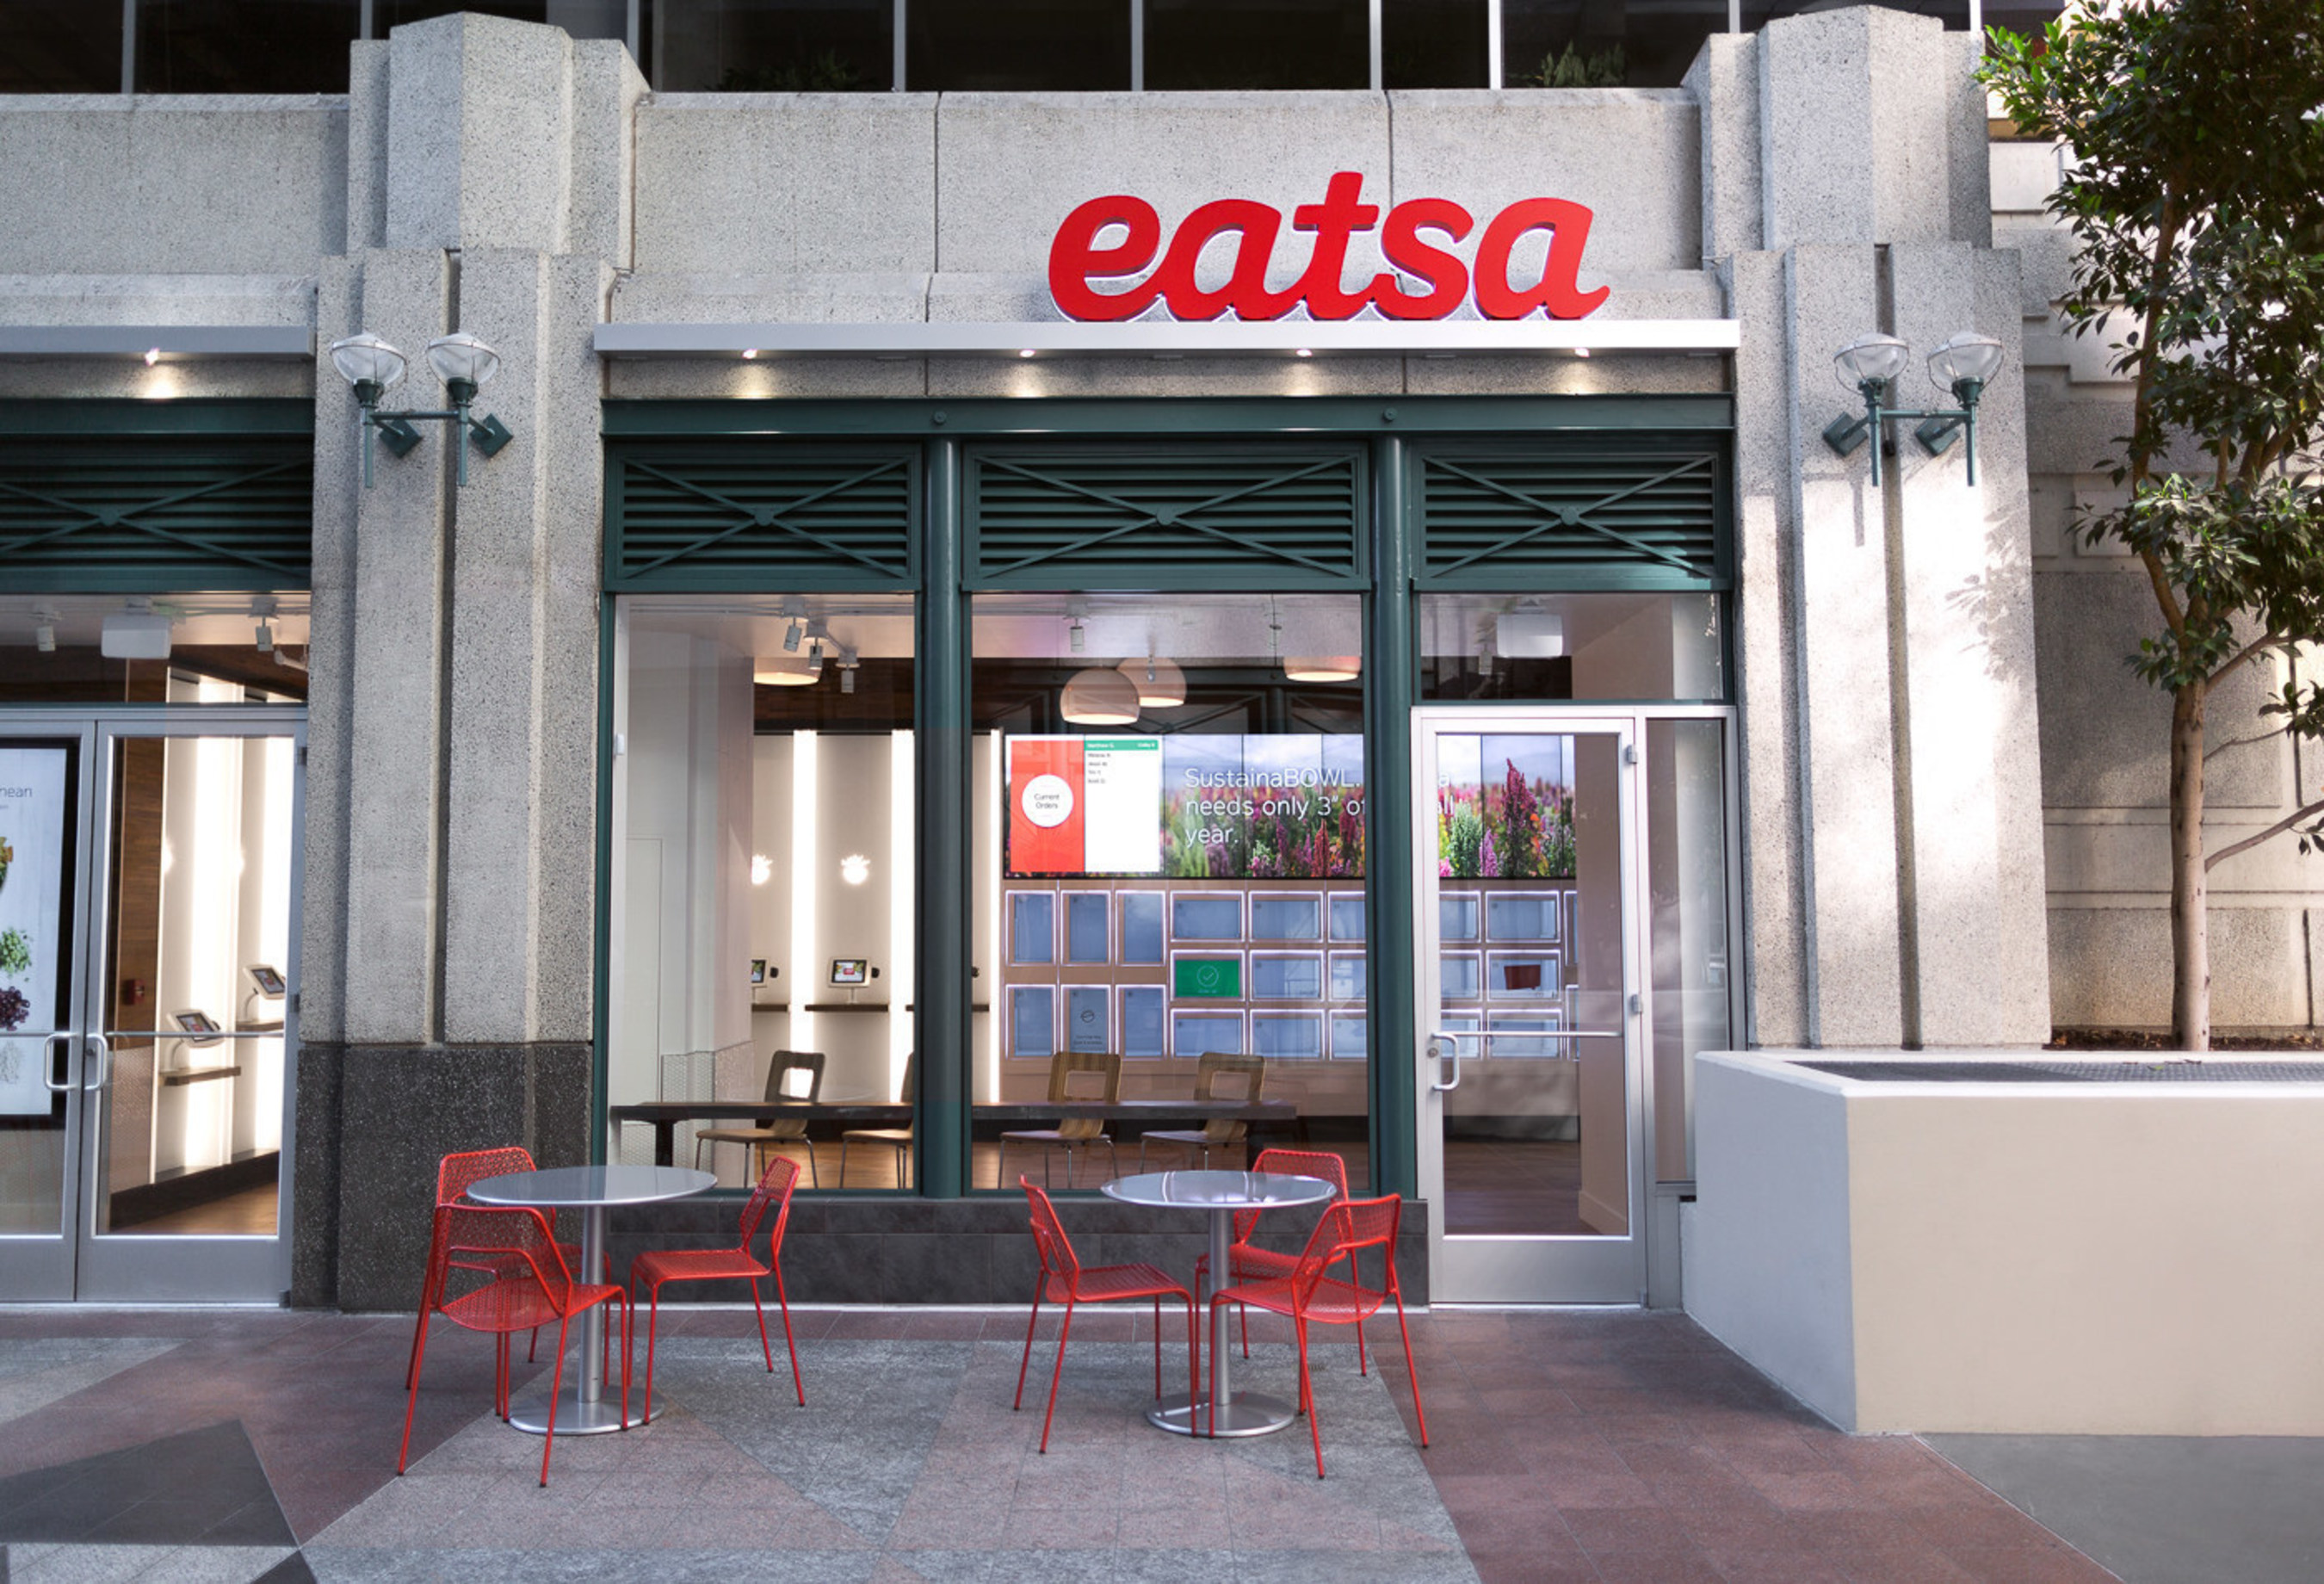 eatsa is San Francisco's first automated fast food experience